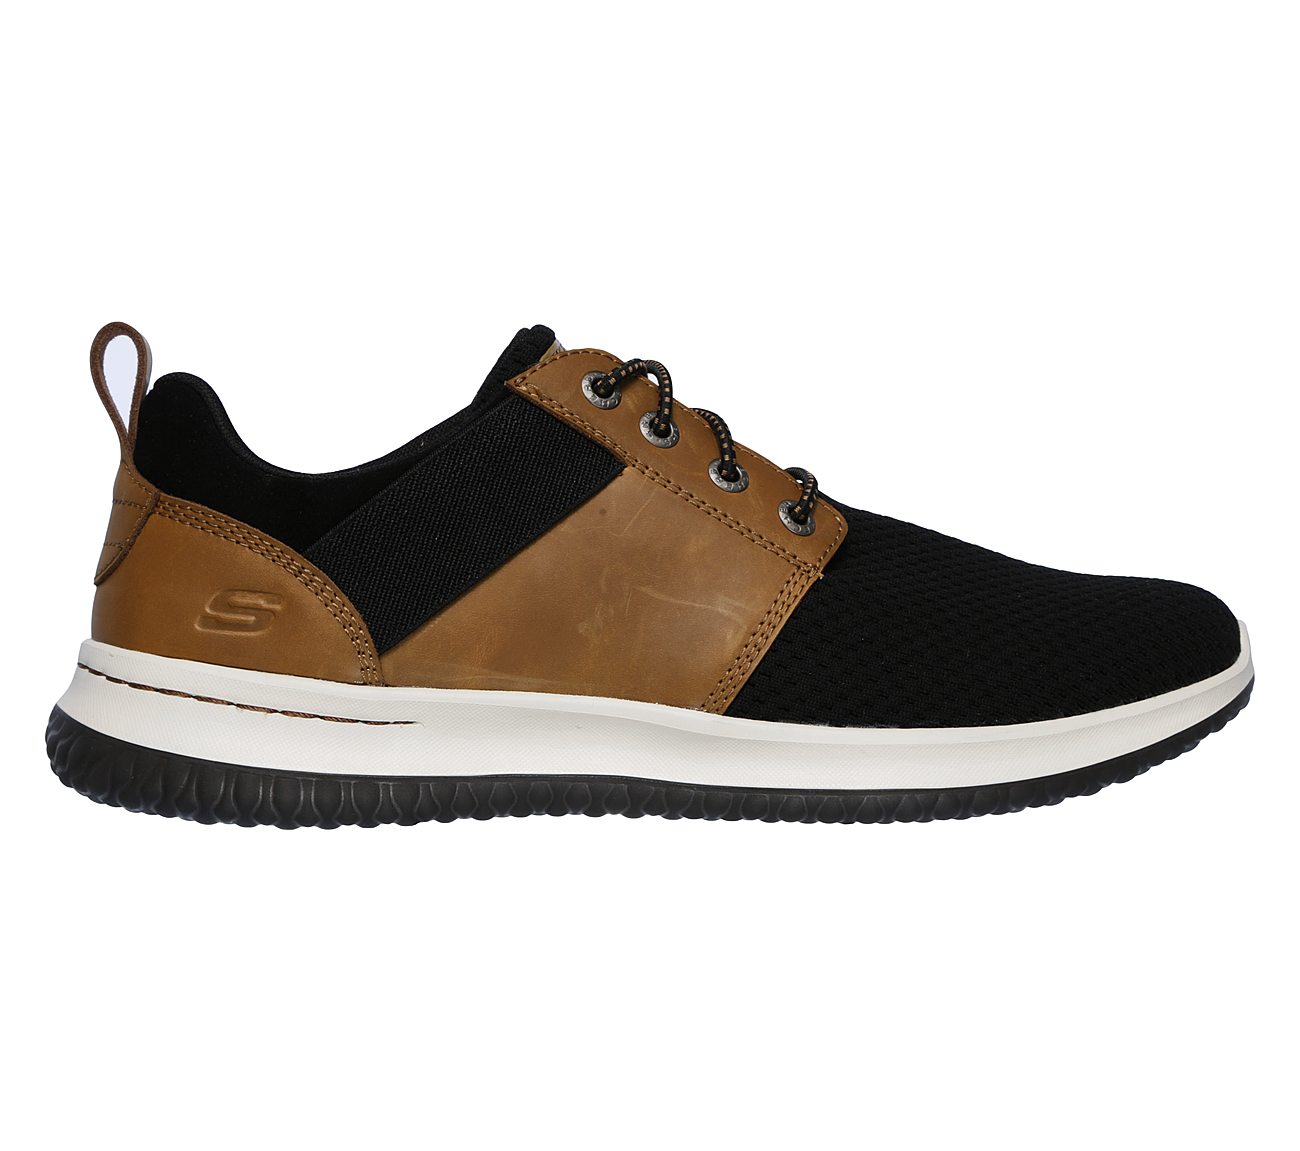 SKECHERS Delson - Brant USA Casuals Shoes